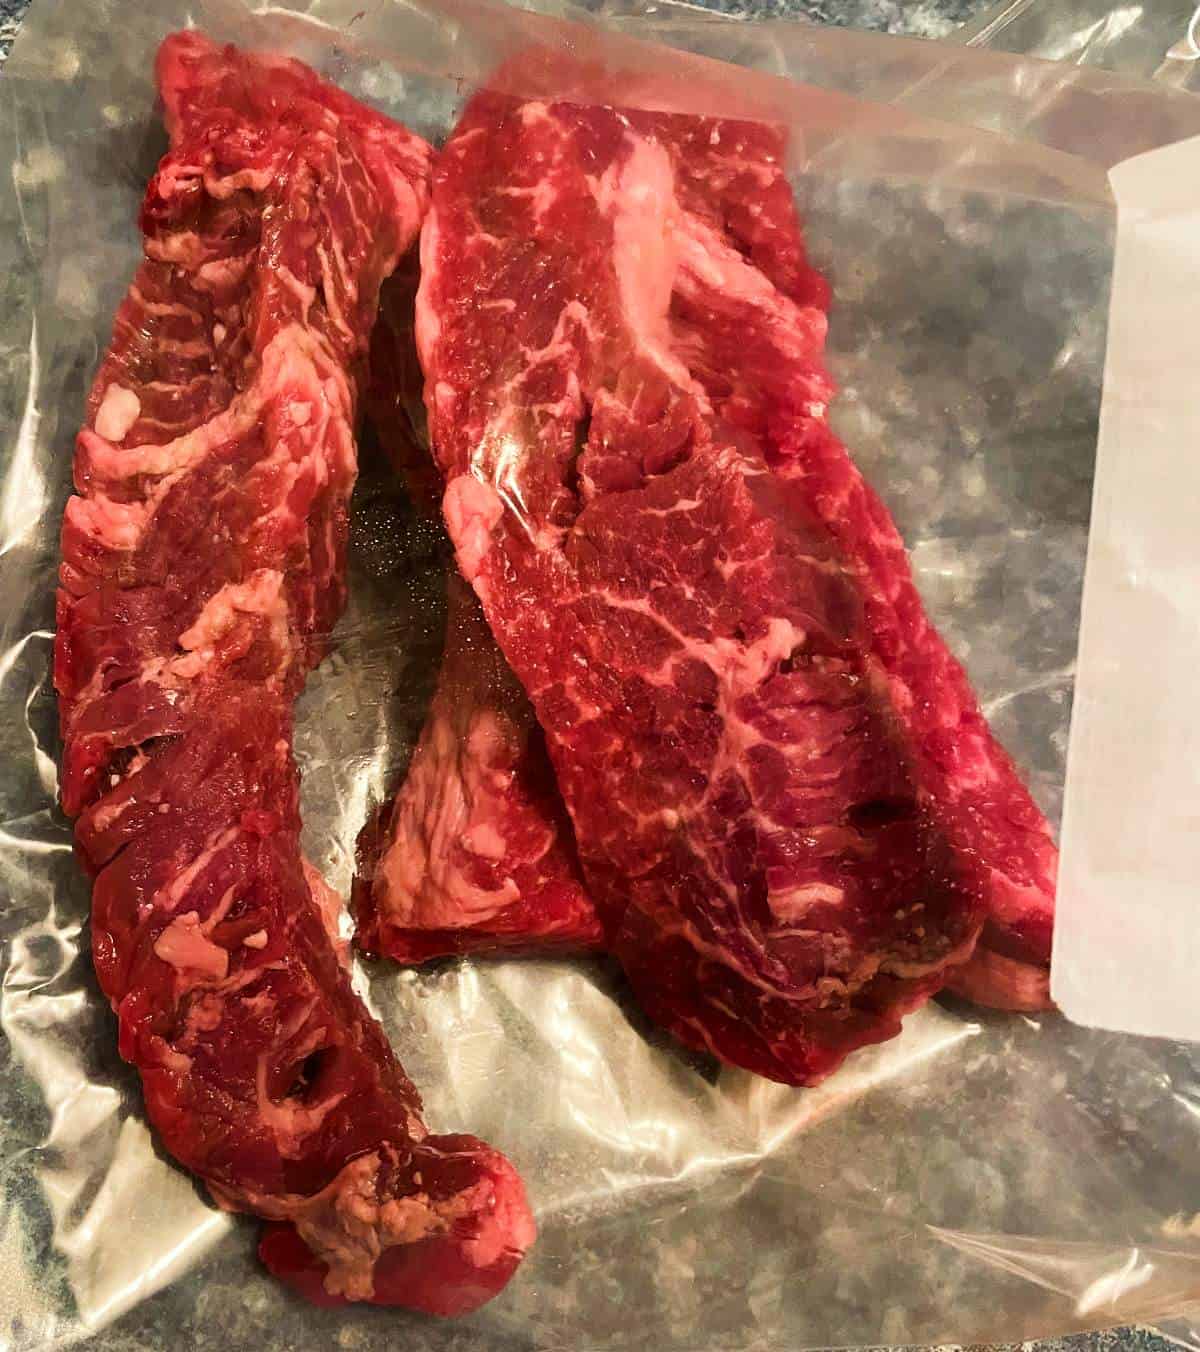 raw steak tips in a large plastic bag.